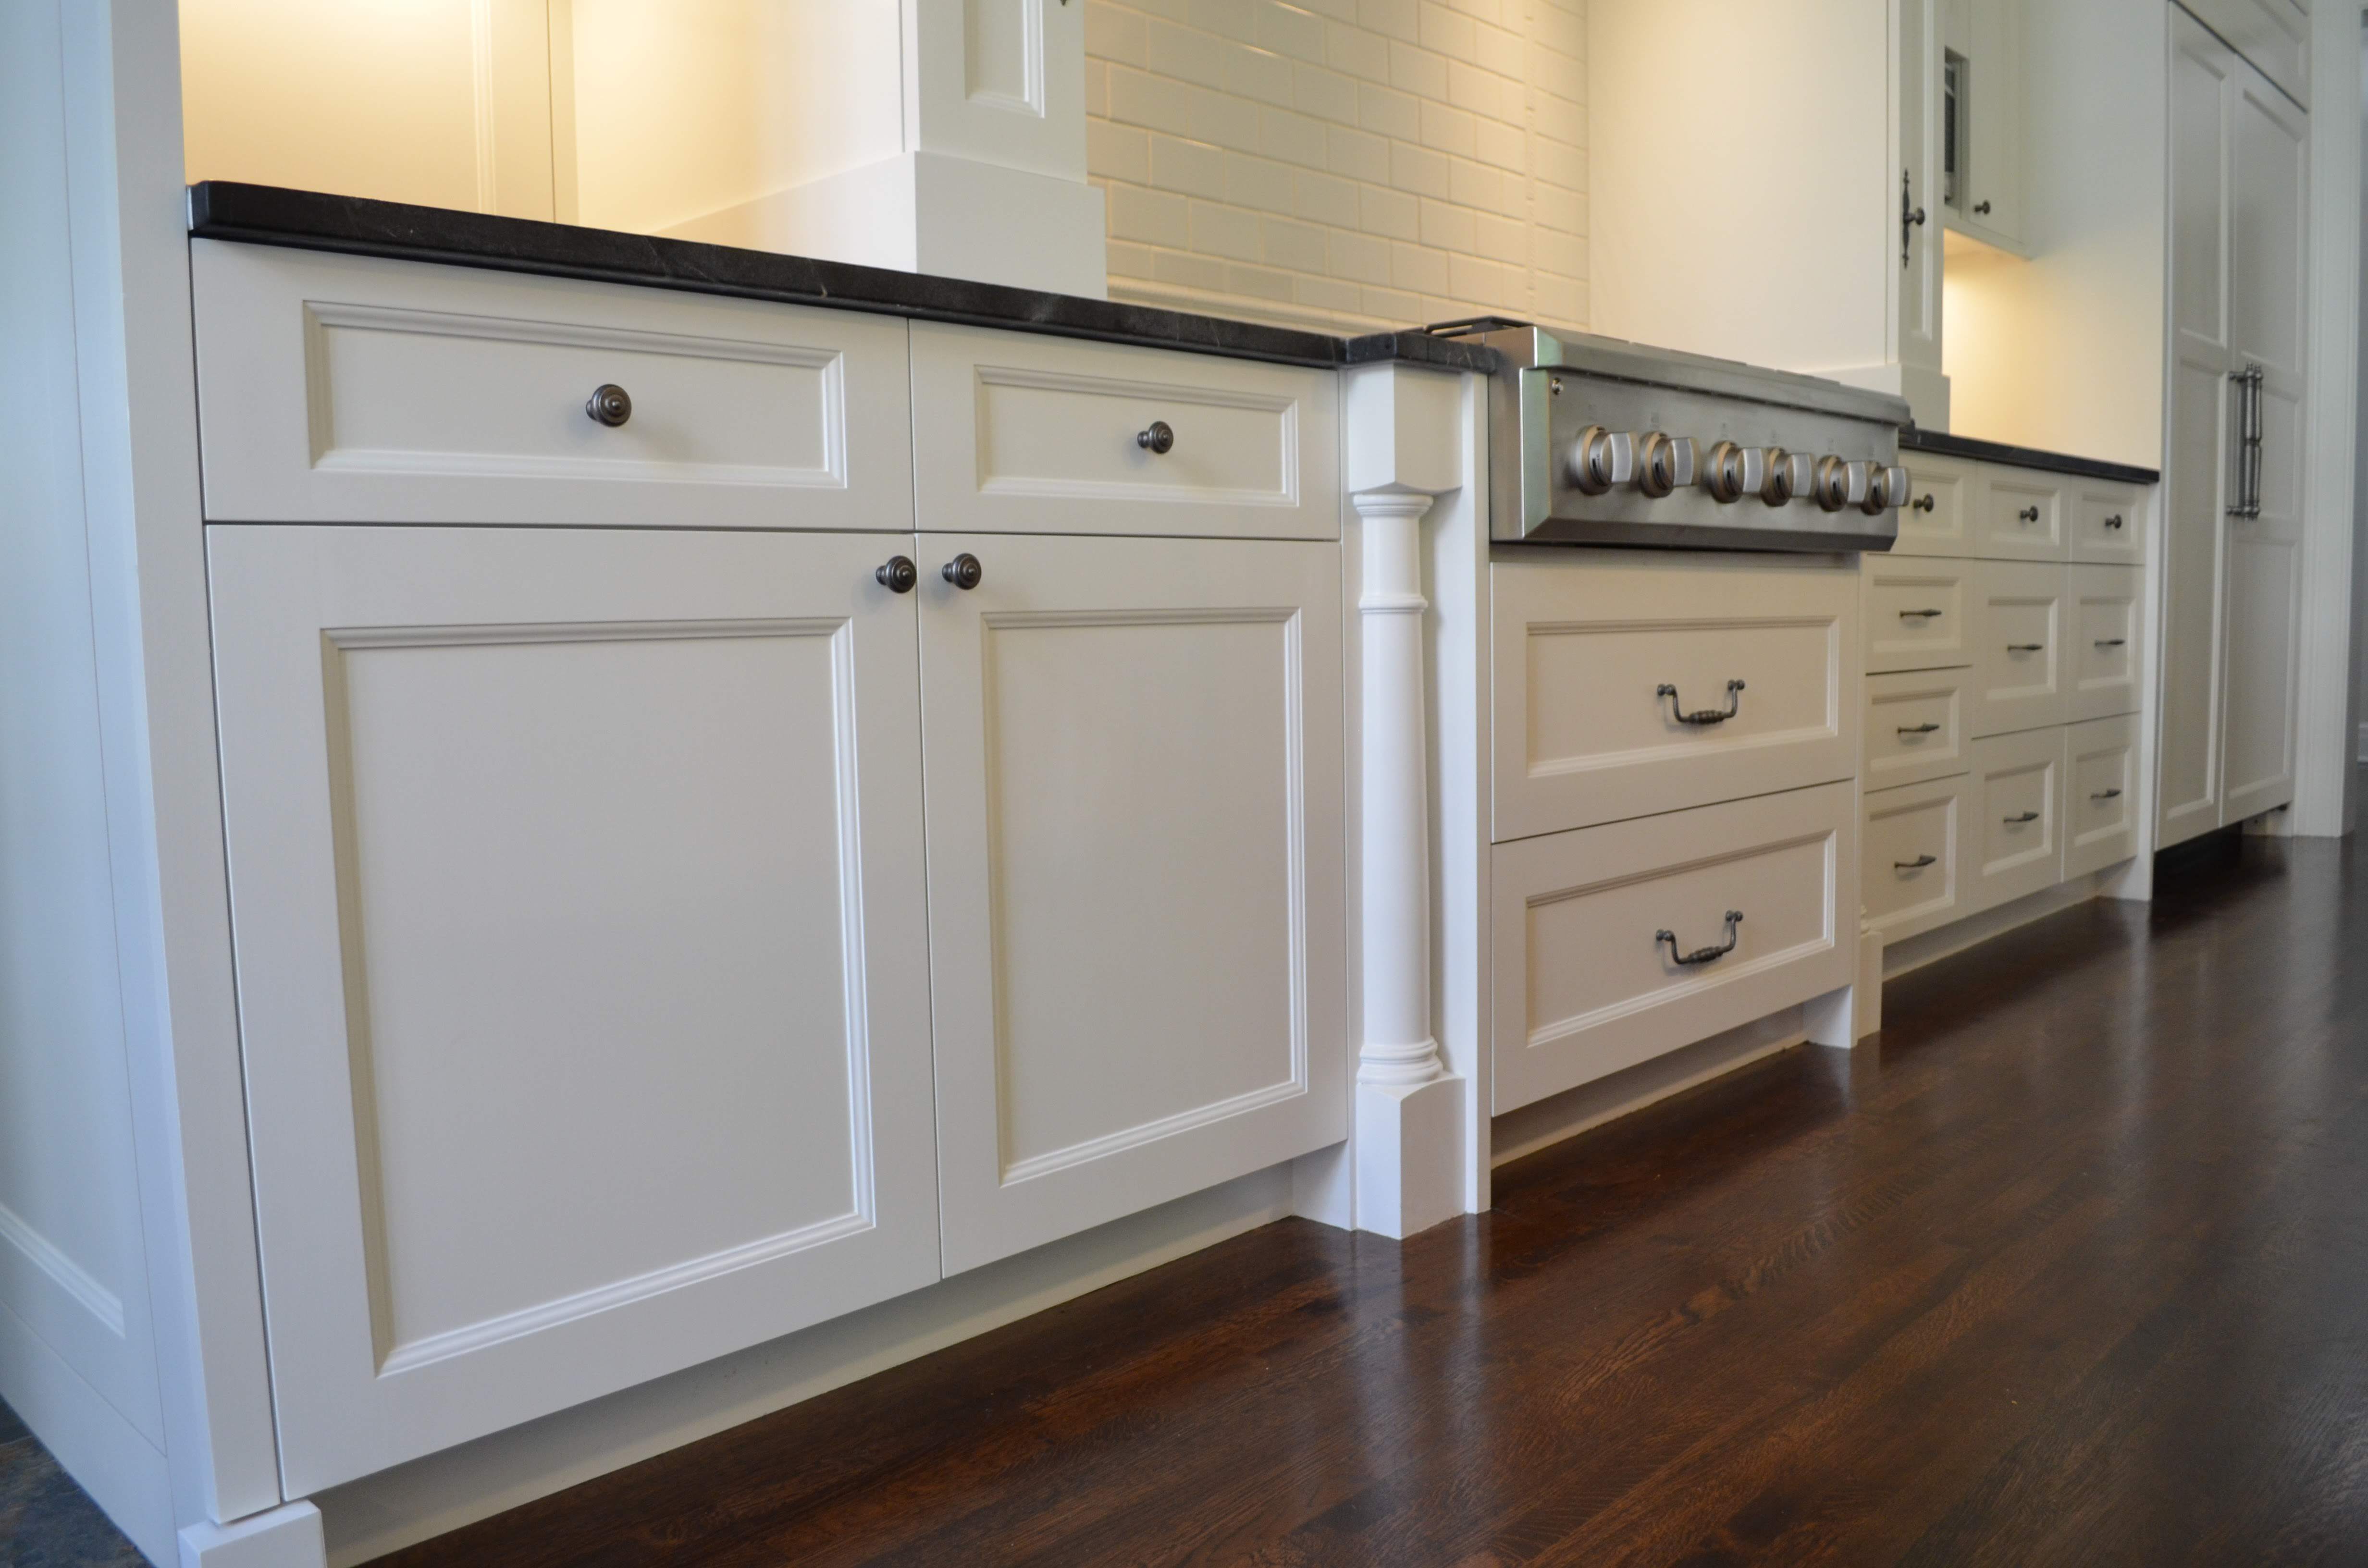 Lower white cabinets in a kitchen next to stove.